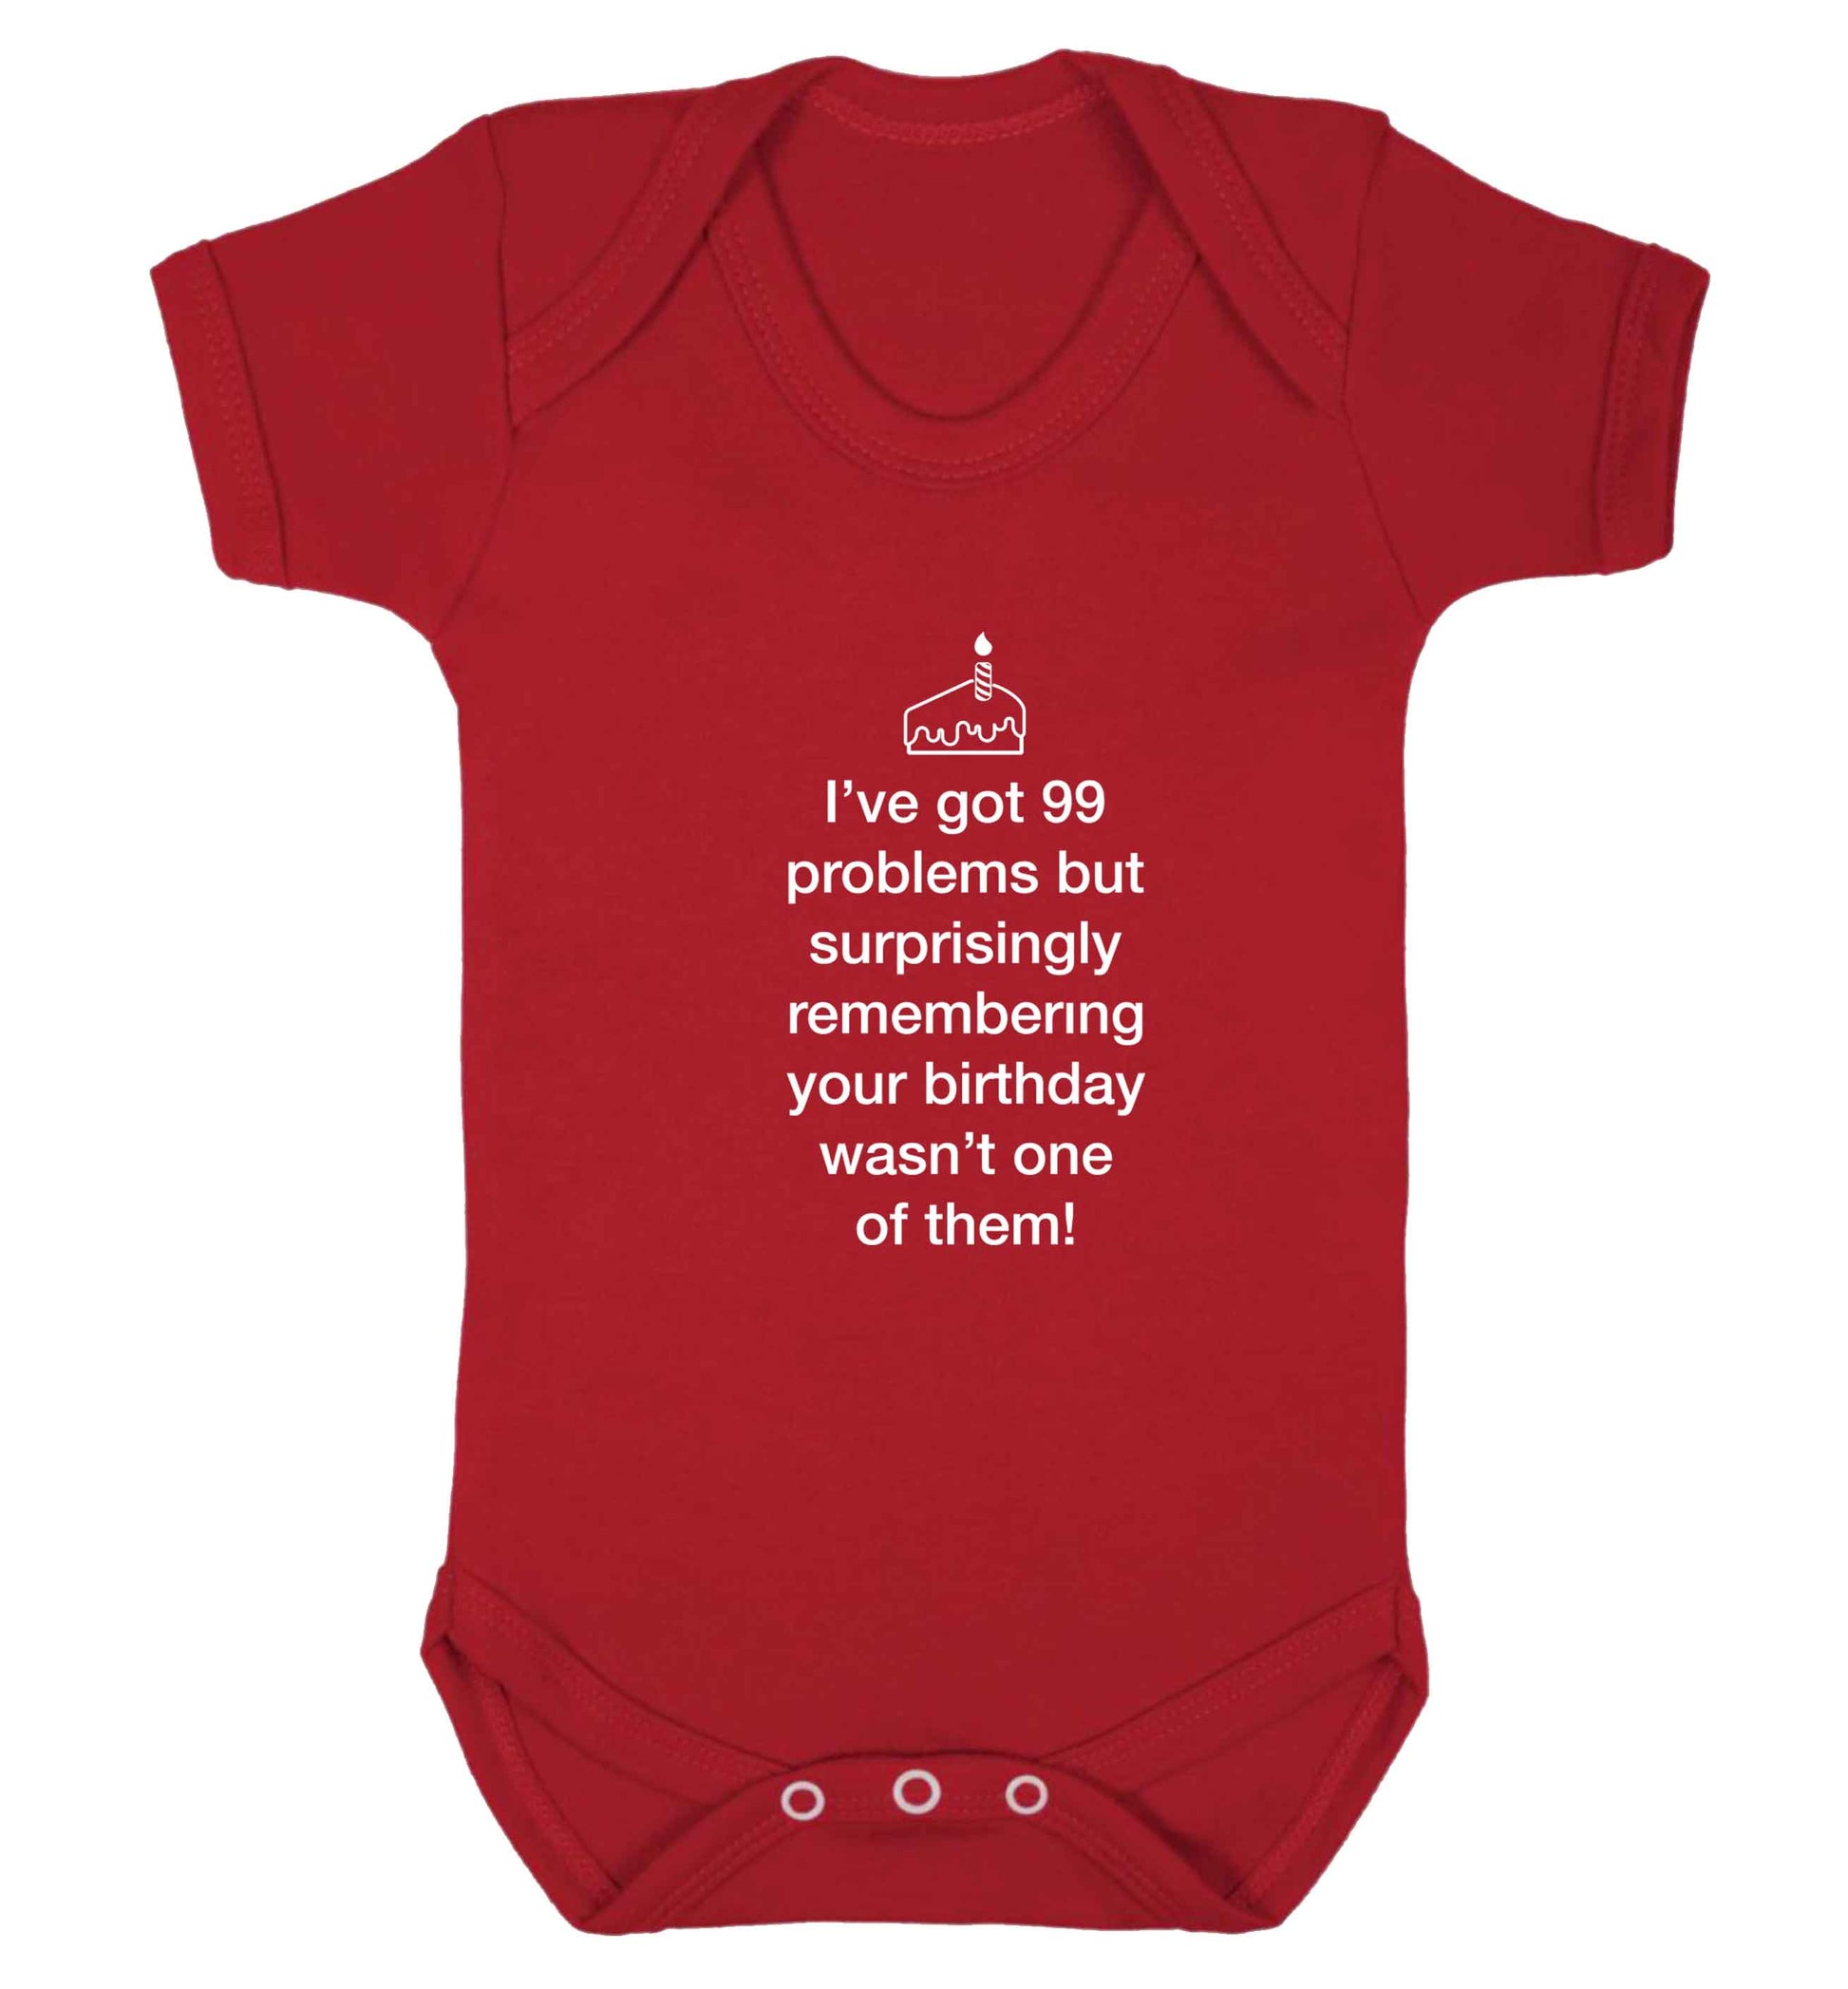 I've got 99 problems but surprisingly remembering your birthday wasn't one of them! baby vest red 18-24 months